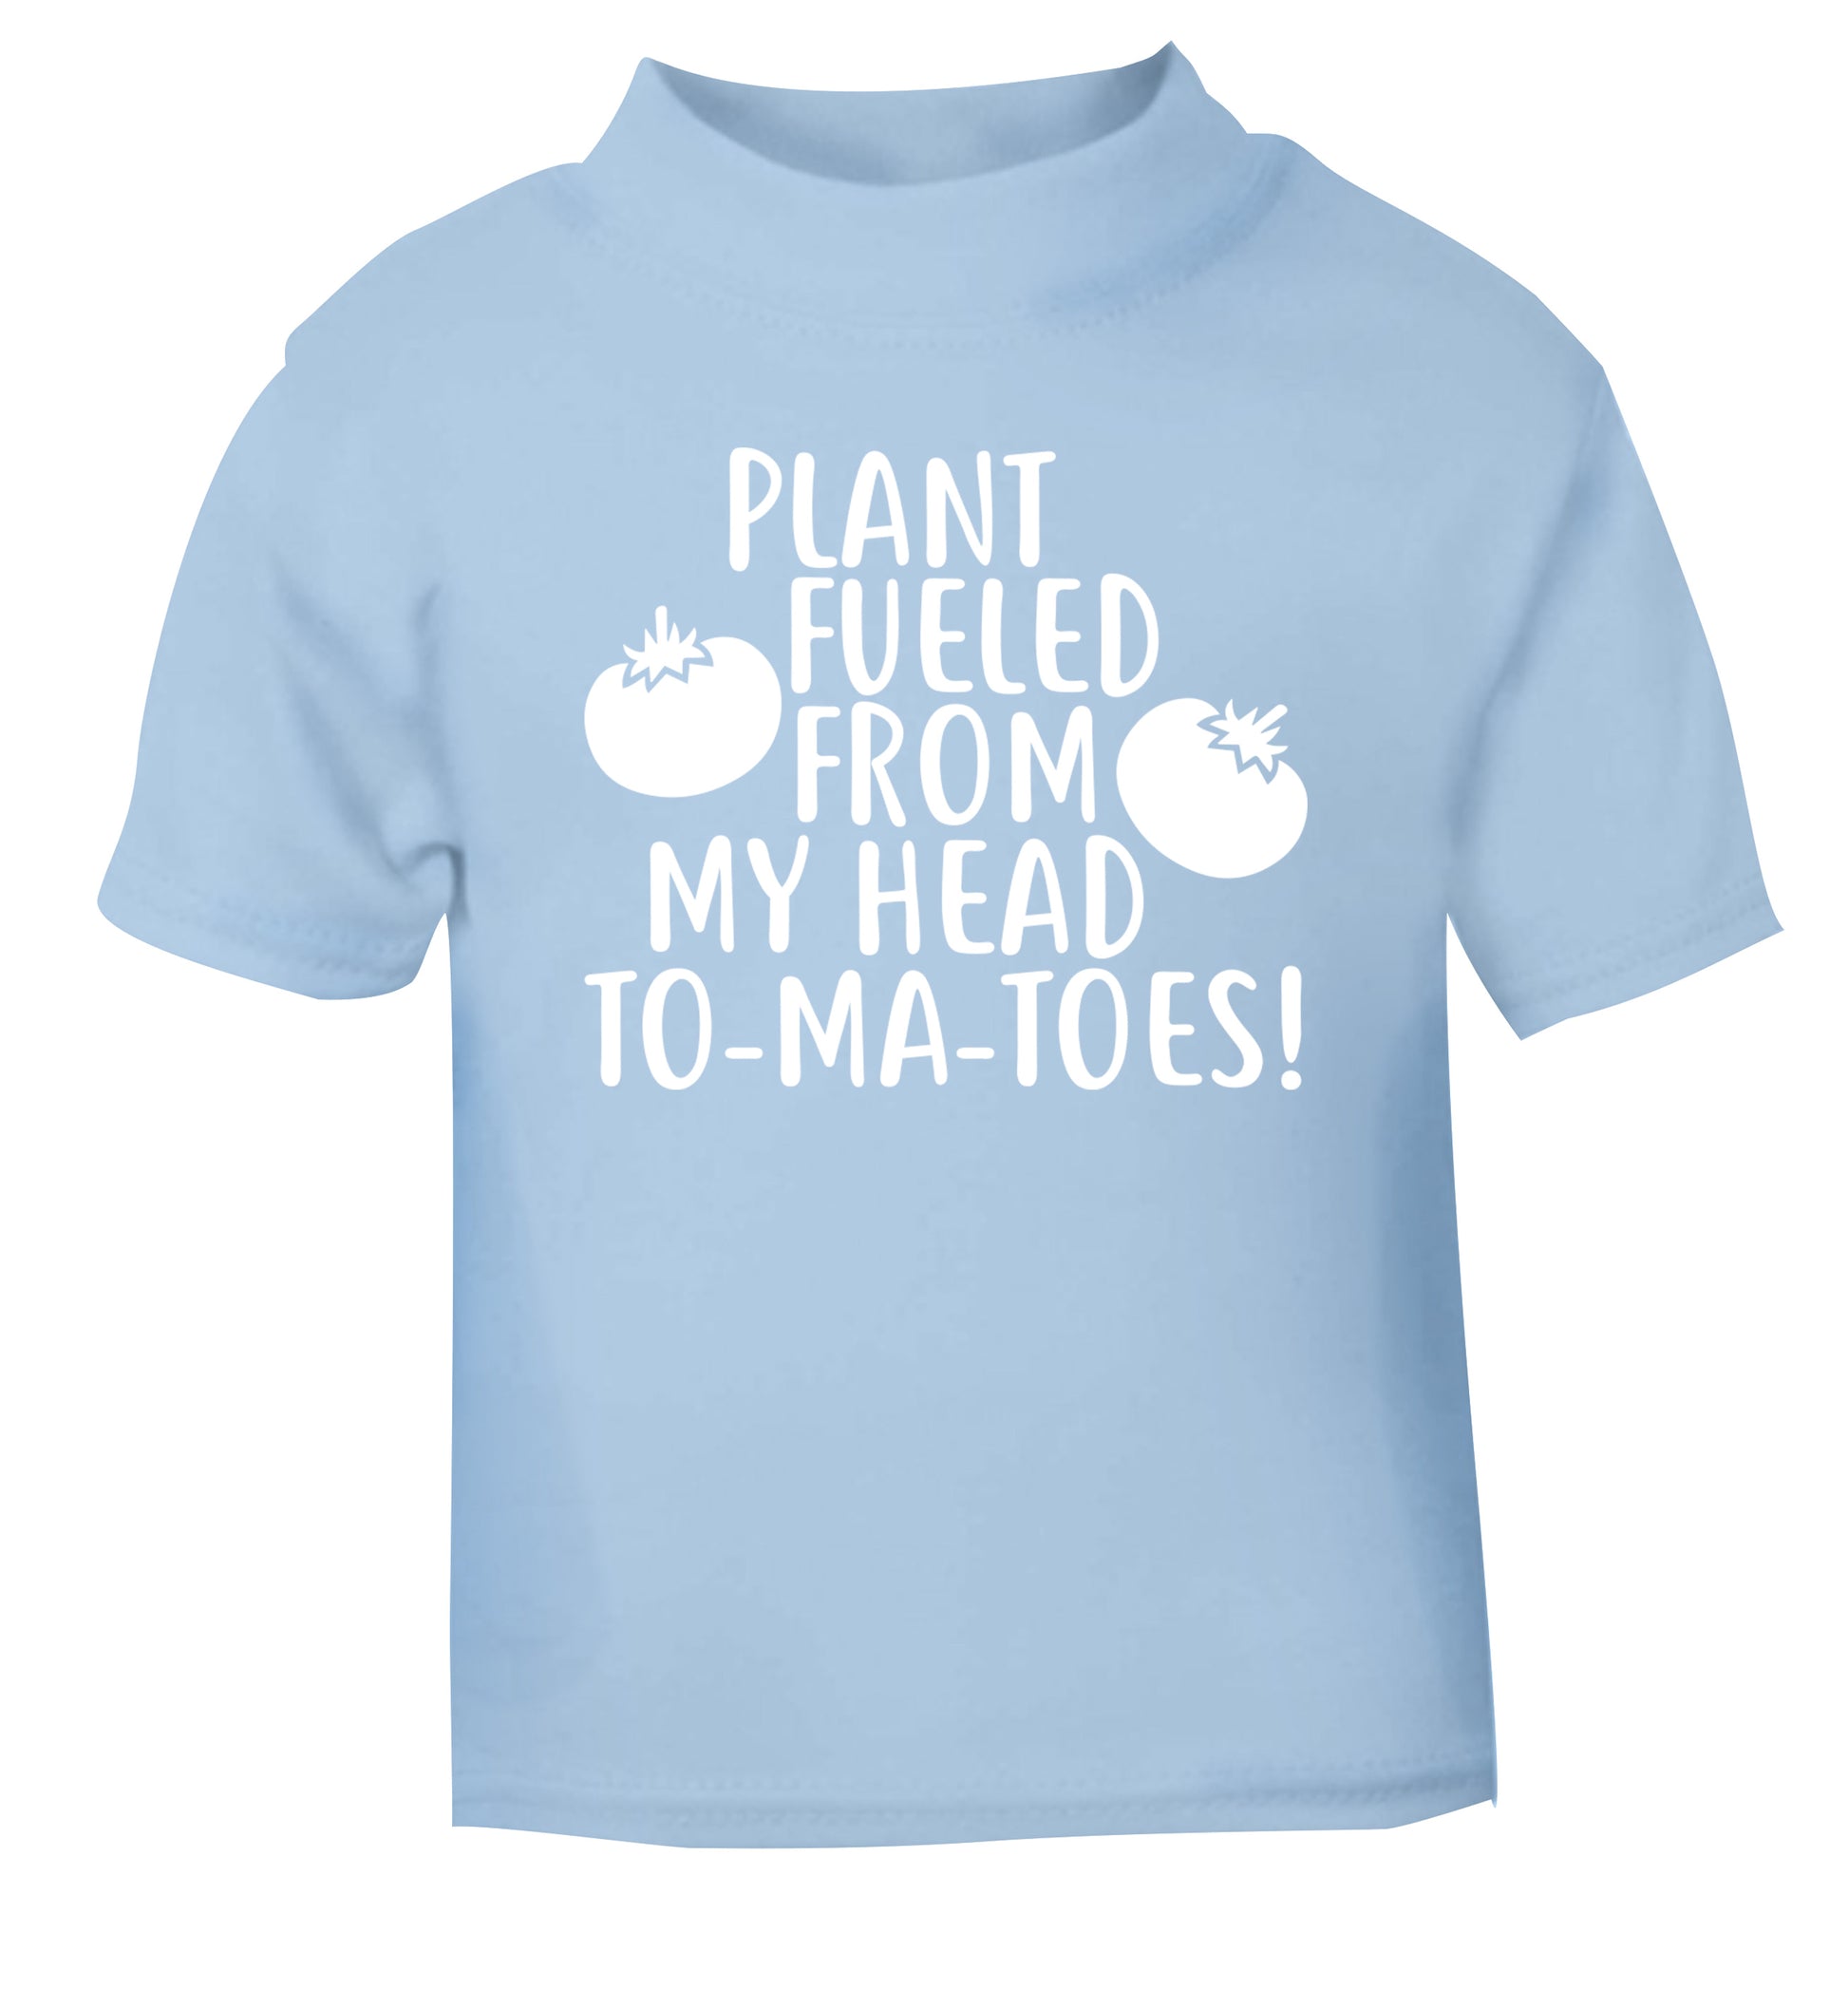 Plant fueled from my head to-ma-toes light blue Baby Toddler Tshirt 2 Years